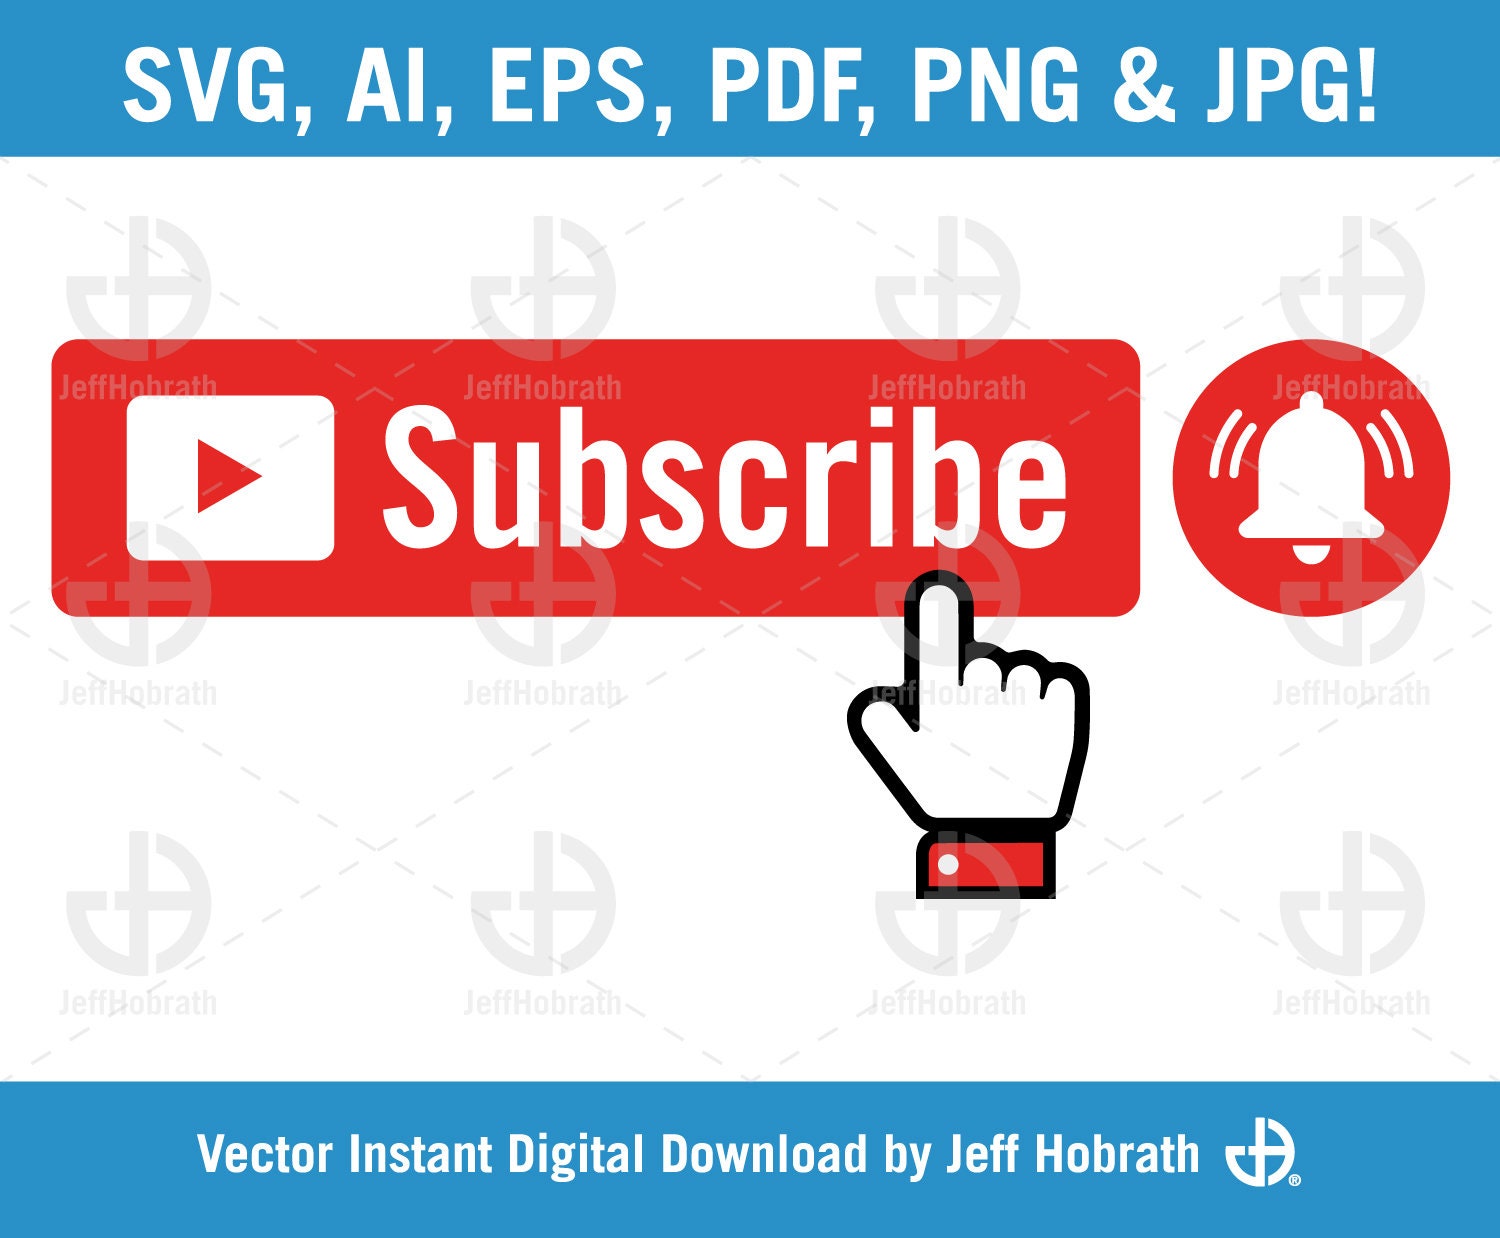 Red Subscribe Button With Notification Bell and Hand Vector Illustration  Digital Download, Ai, Eps, Pdf, Svg, Png and Jpg 